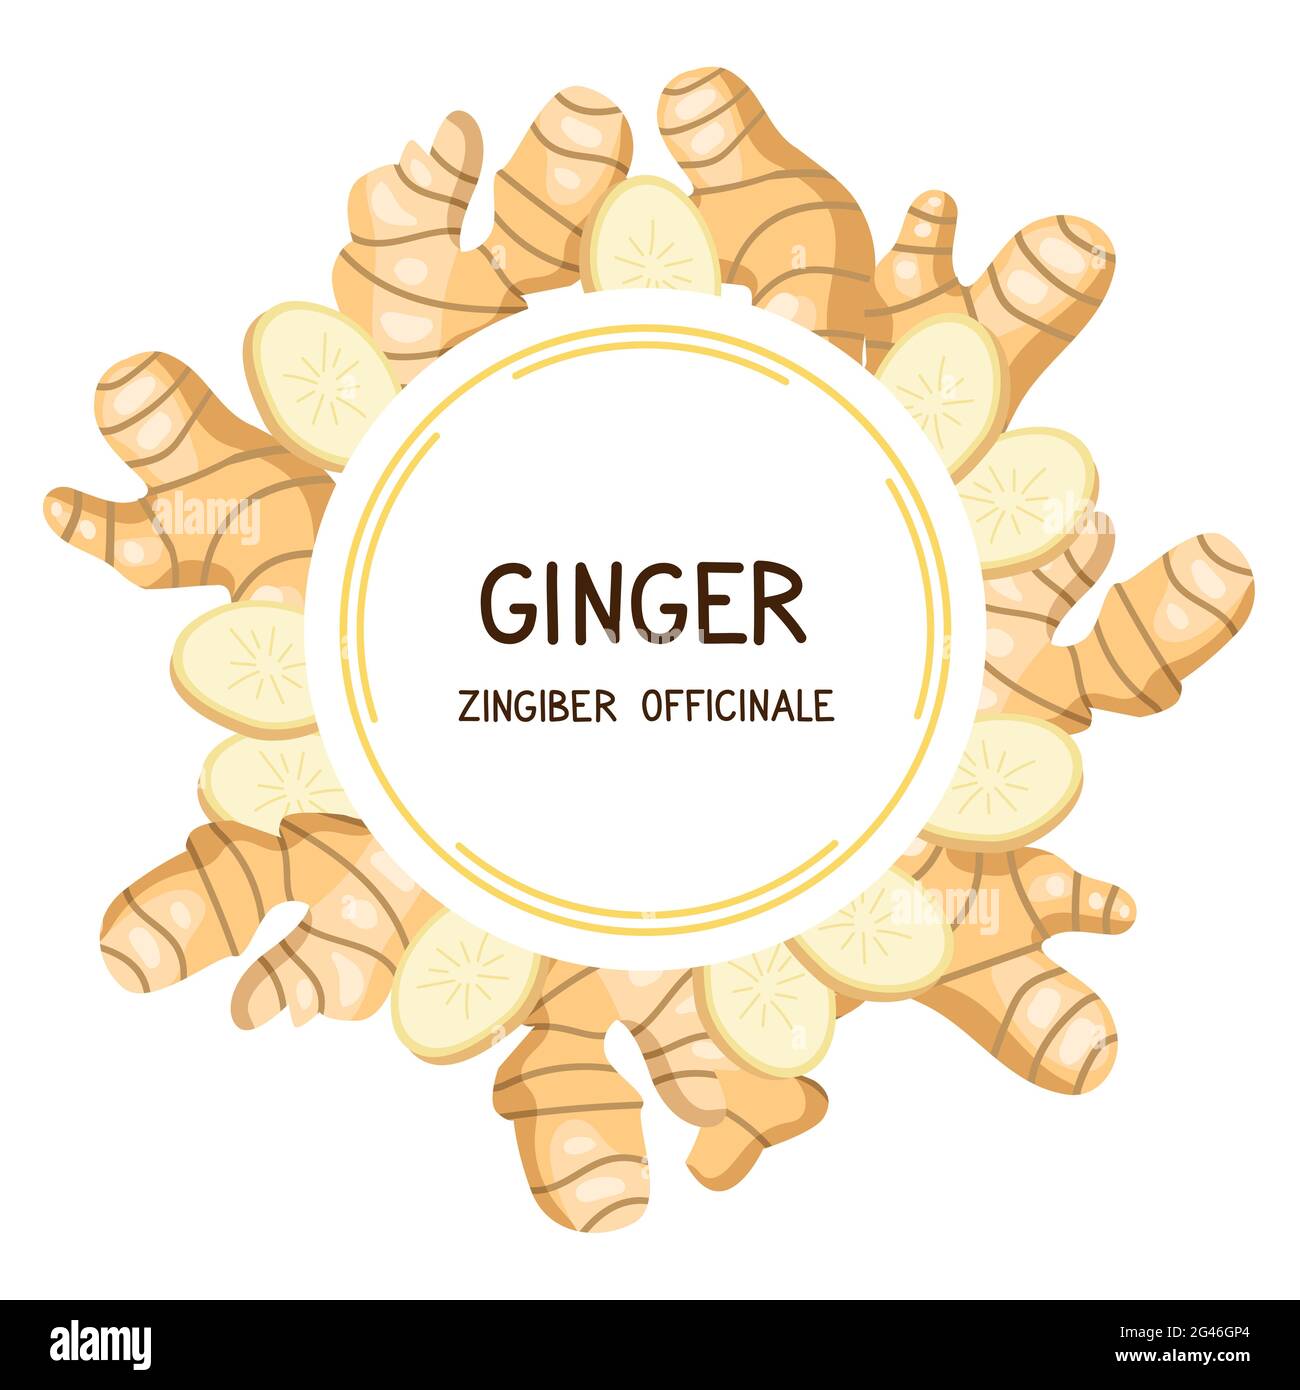 Ginger. Frame with ginger roots and slices. Vector illustration isolated on white background. Product label with latin name zingiber officinale. Stock Vector